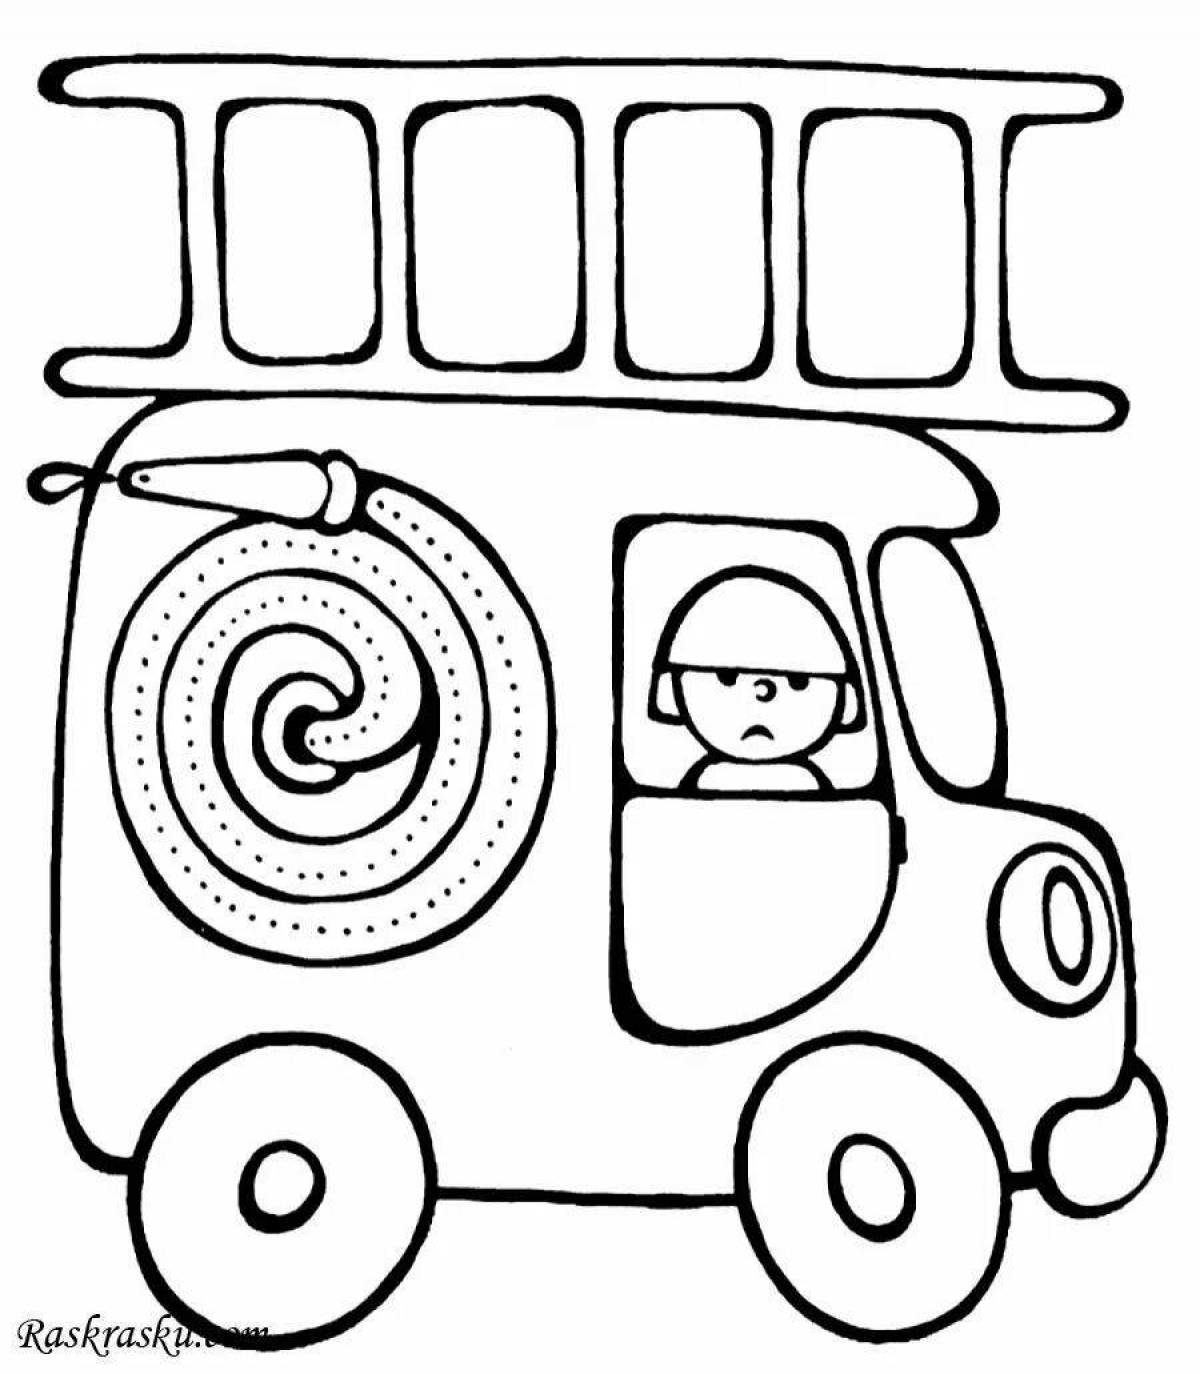 Vibrant transport coloring book for toddlers 2-3 years old